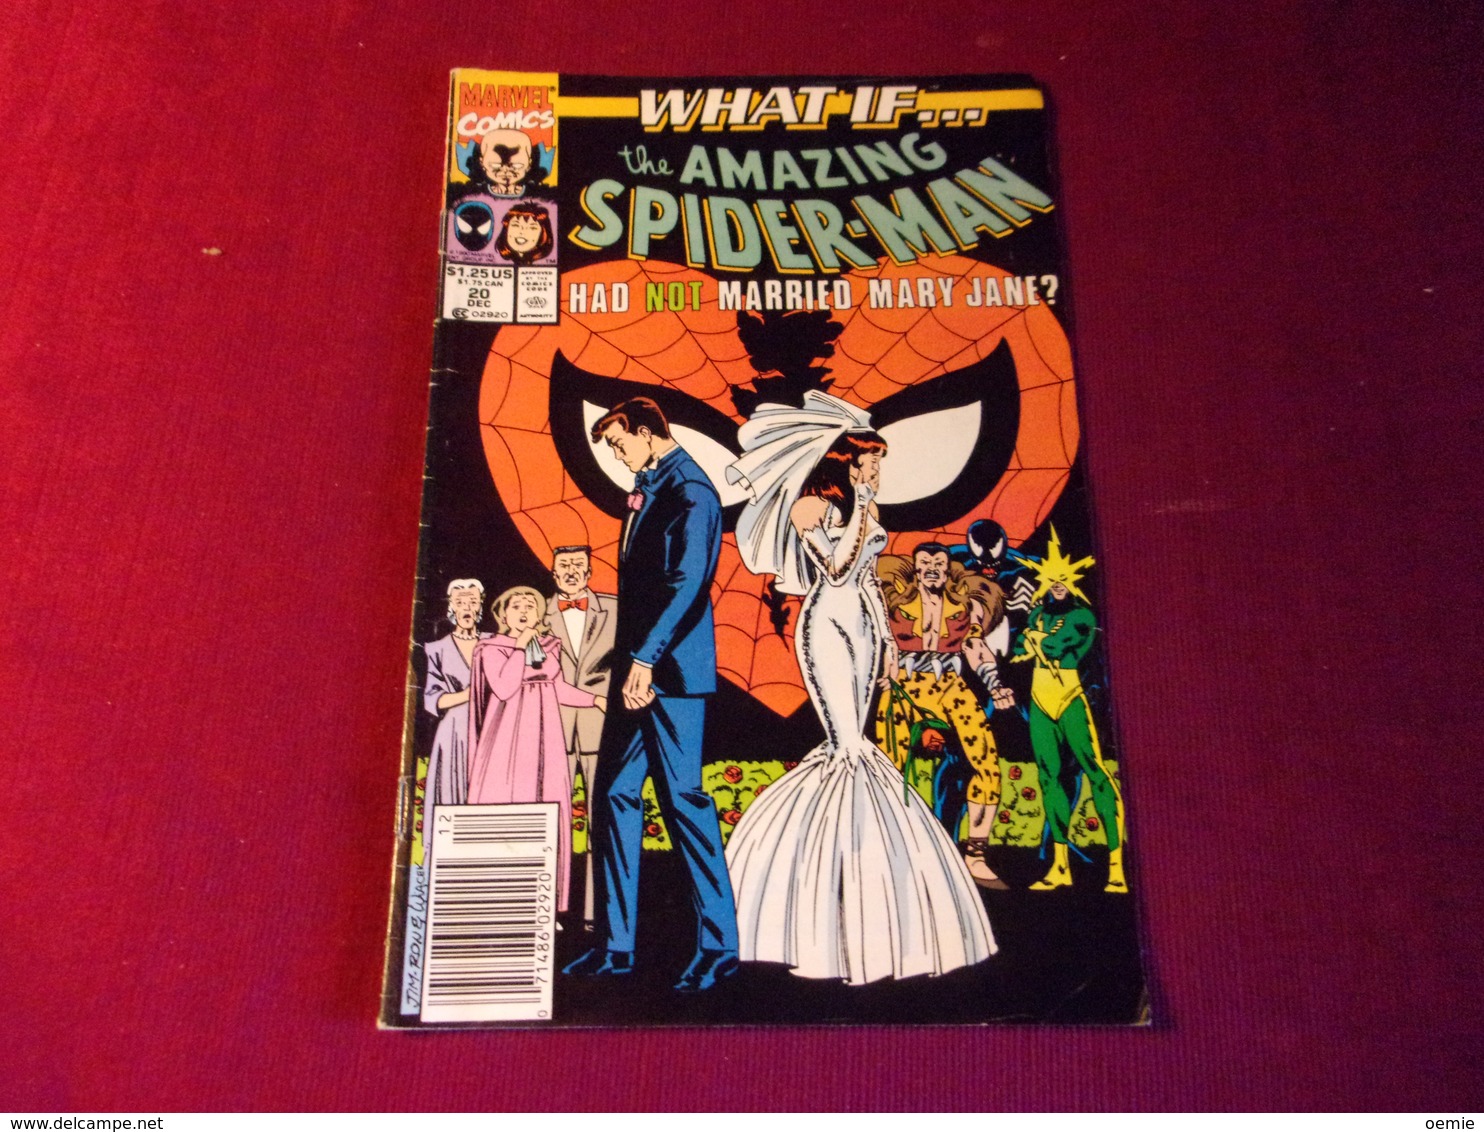 THE AMAZING  WHAT IF HAD NOT MARIED MARY JANE     SPIDER MAN   20 DEC - Marvel